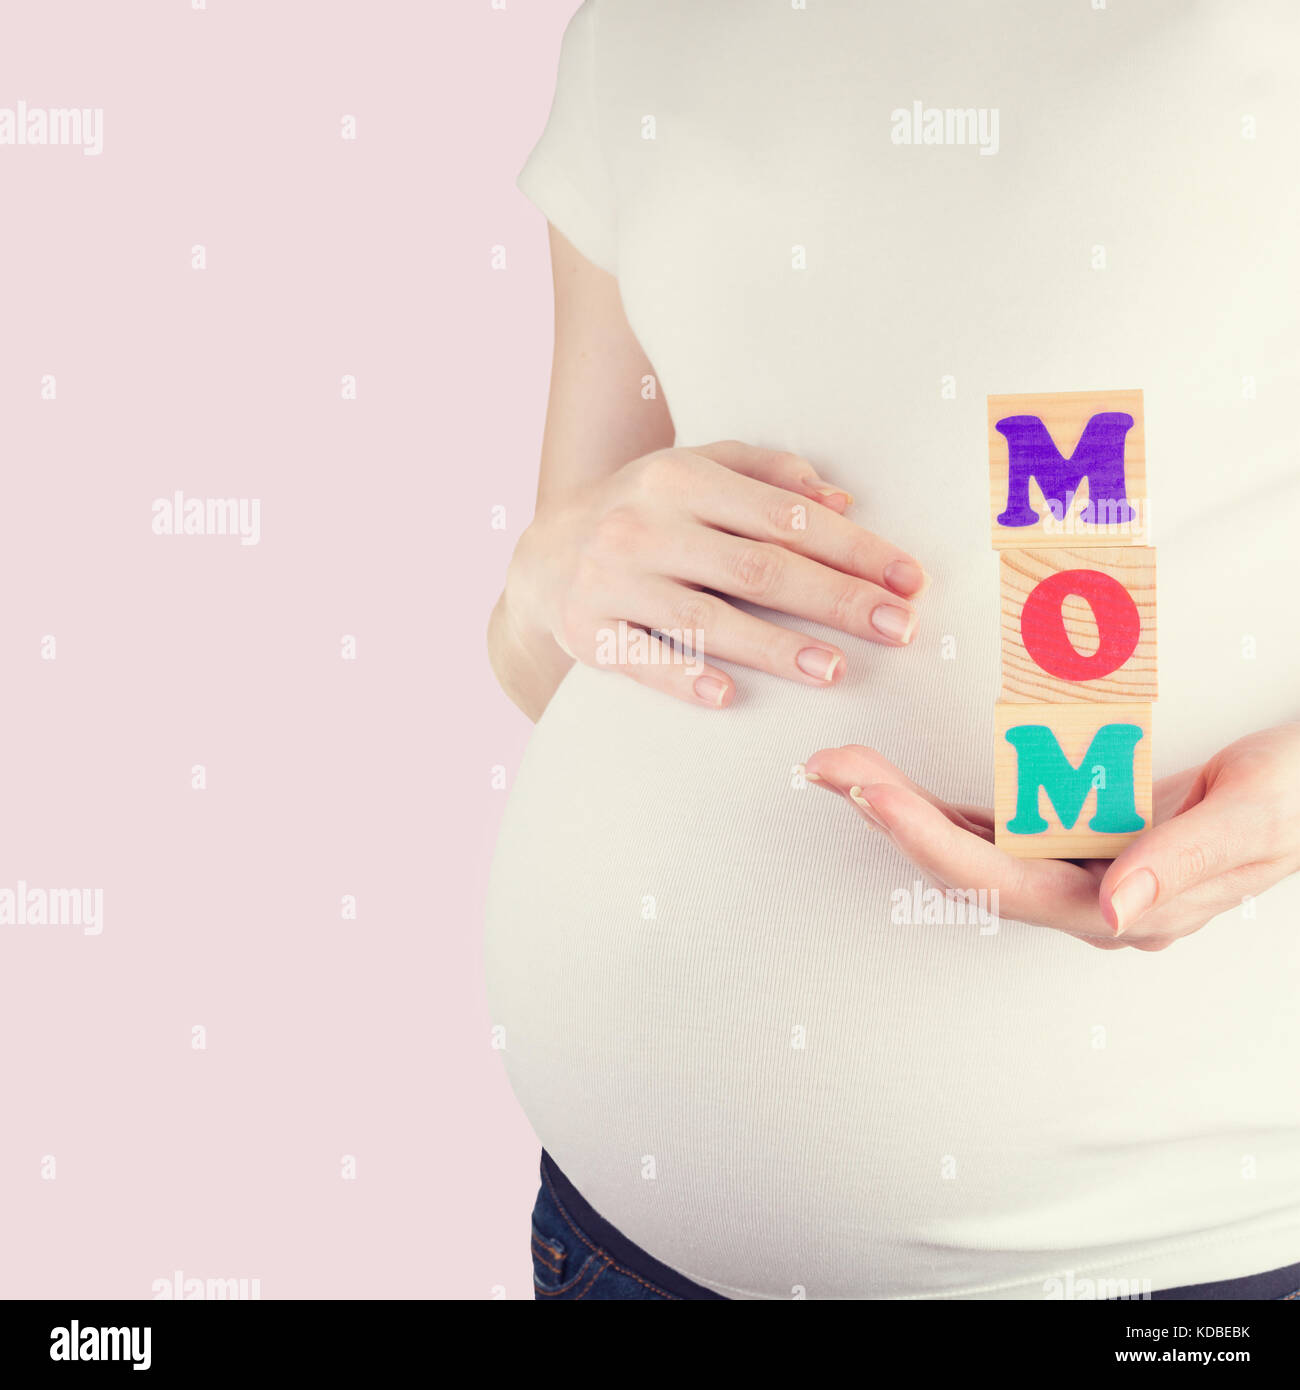 Pregnant woman holding MOM sign Stock Photo